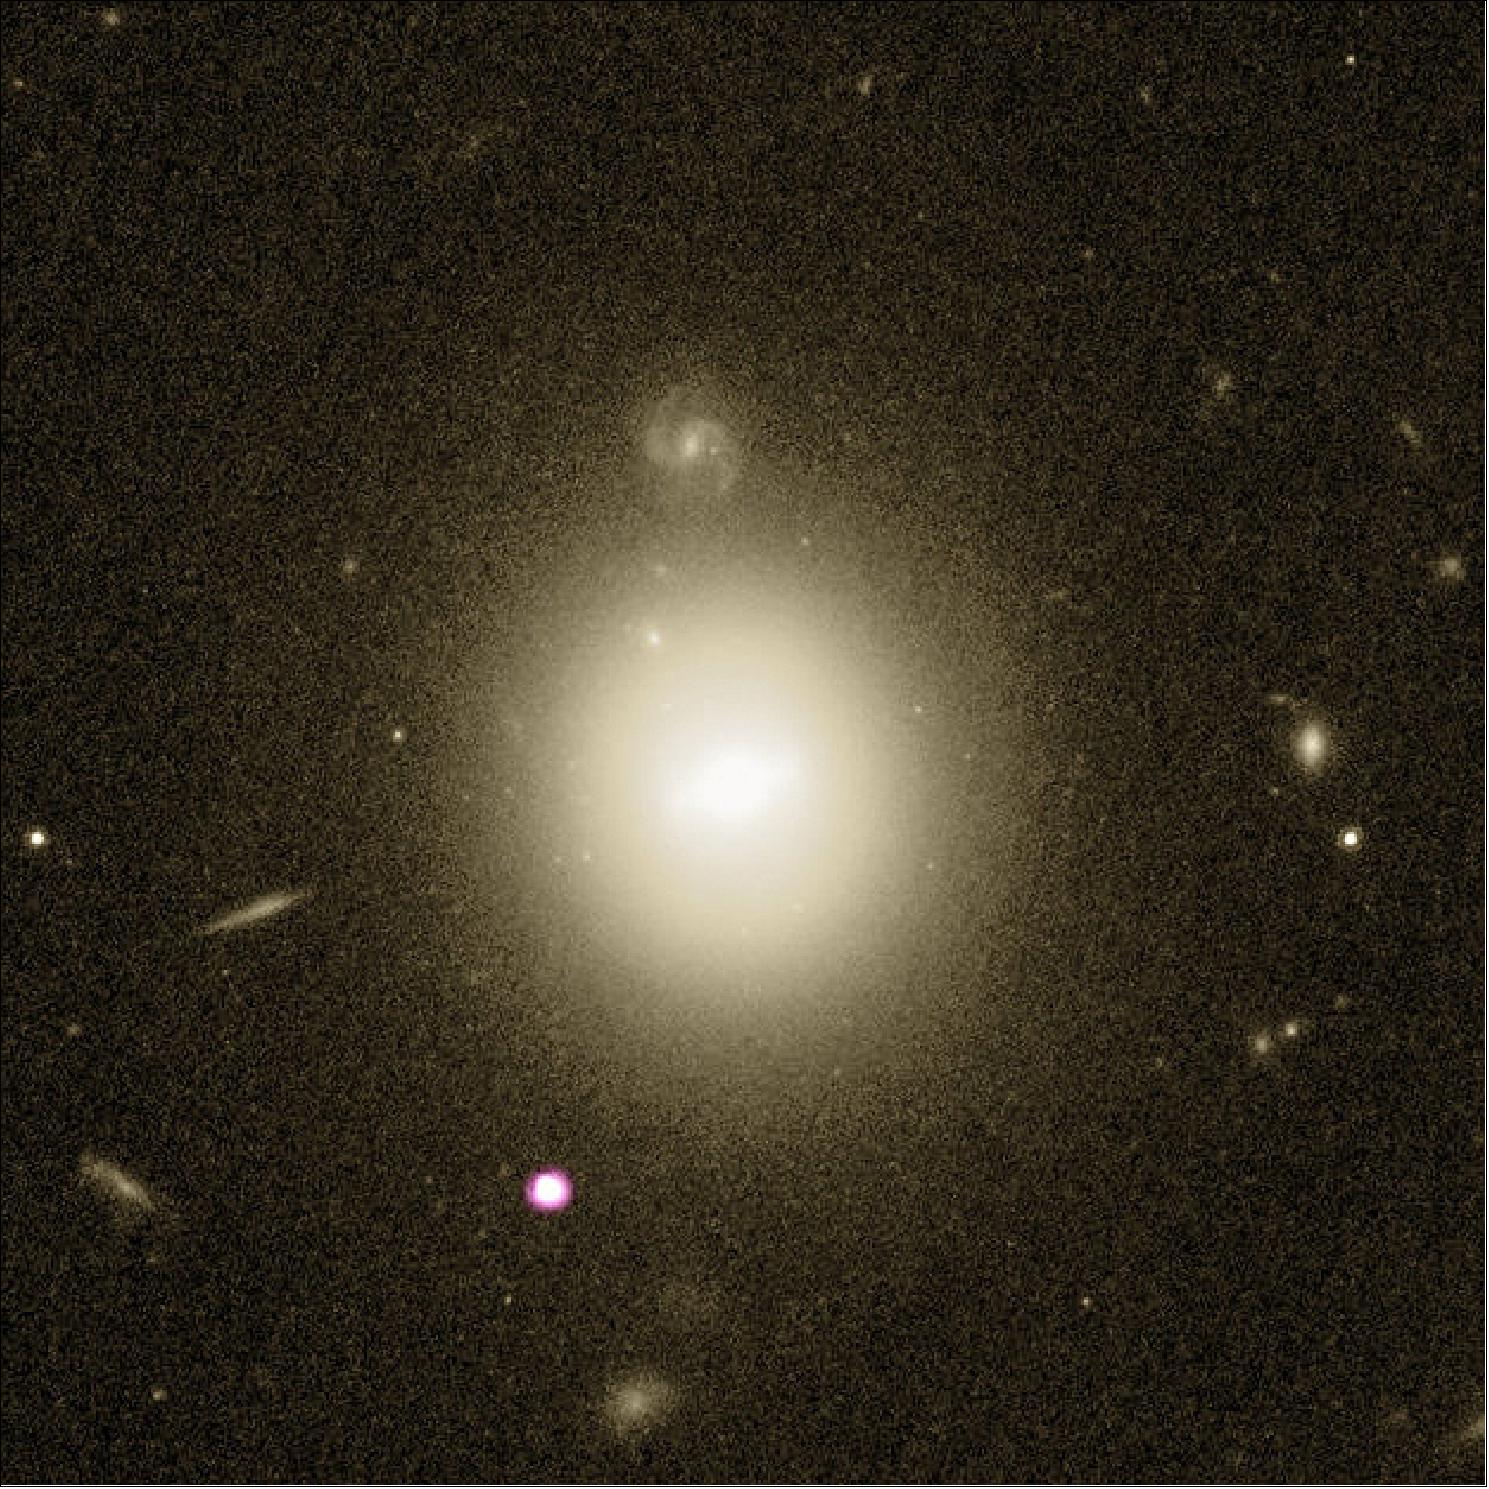 Figure 79: Best ever intermediate-mass black hole candidate (purple spot) at the outskirts of a distant galaxy (image credit: Optical: NASA/ESA/Hubble/STScI; X-ray: NASA/CXC/UNH/D. Lin et al.)